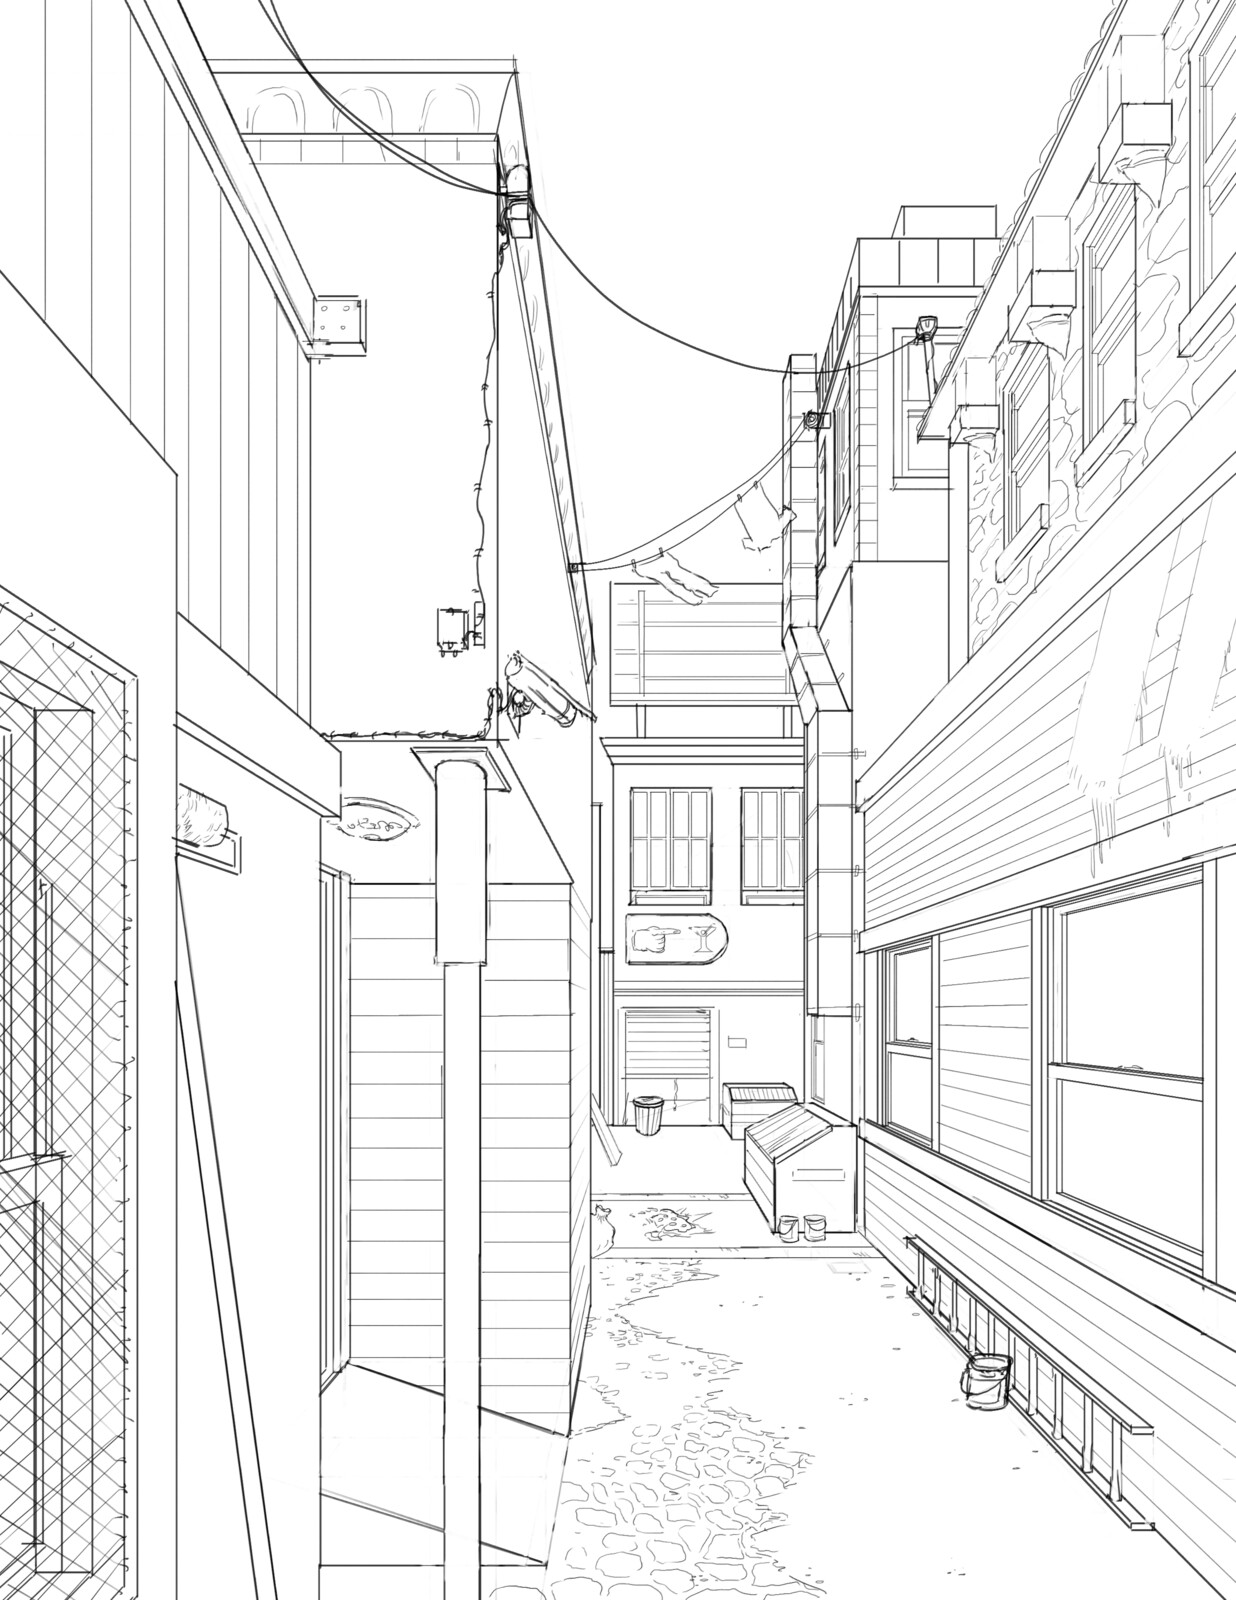 The goal of this illustration was for an assignment about perspective and drawing the linework for an alley of our own design.